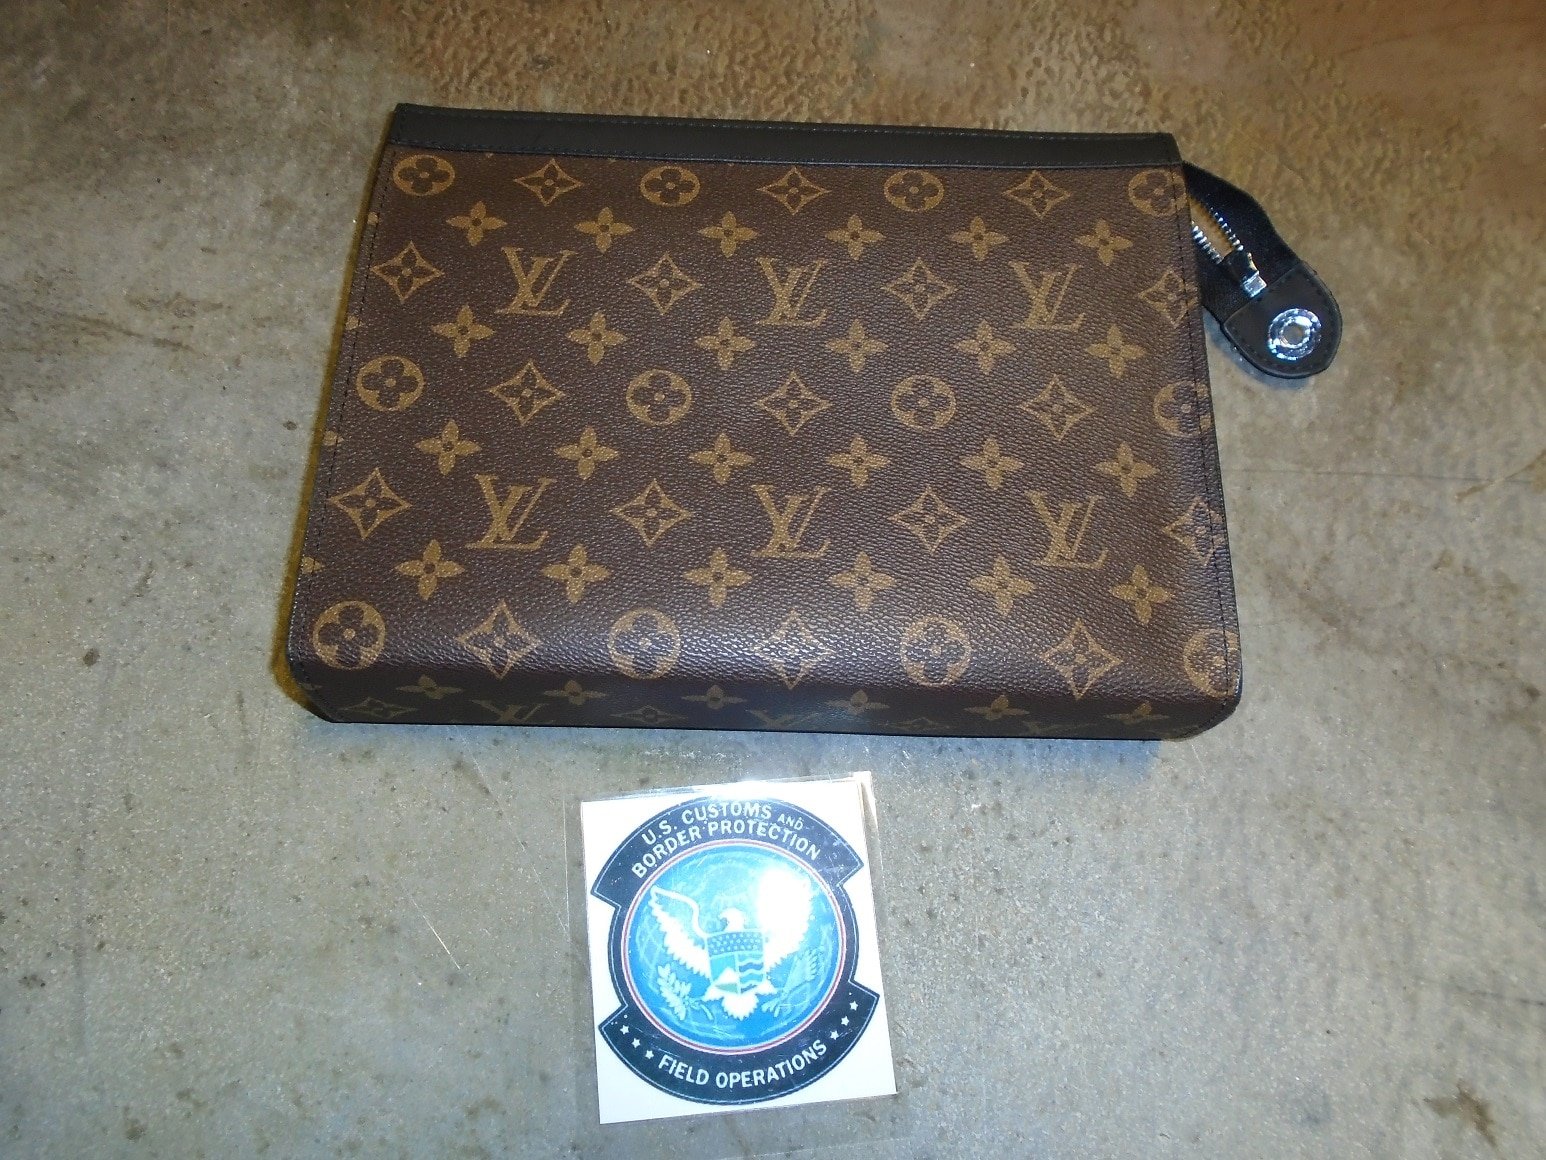 Louis Vuitton Wallets for sale in Lancaster, Wisconsin, Facebook  Marketplace